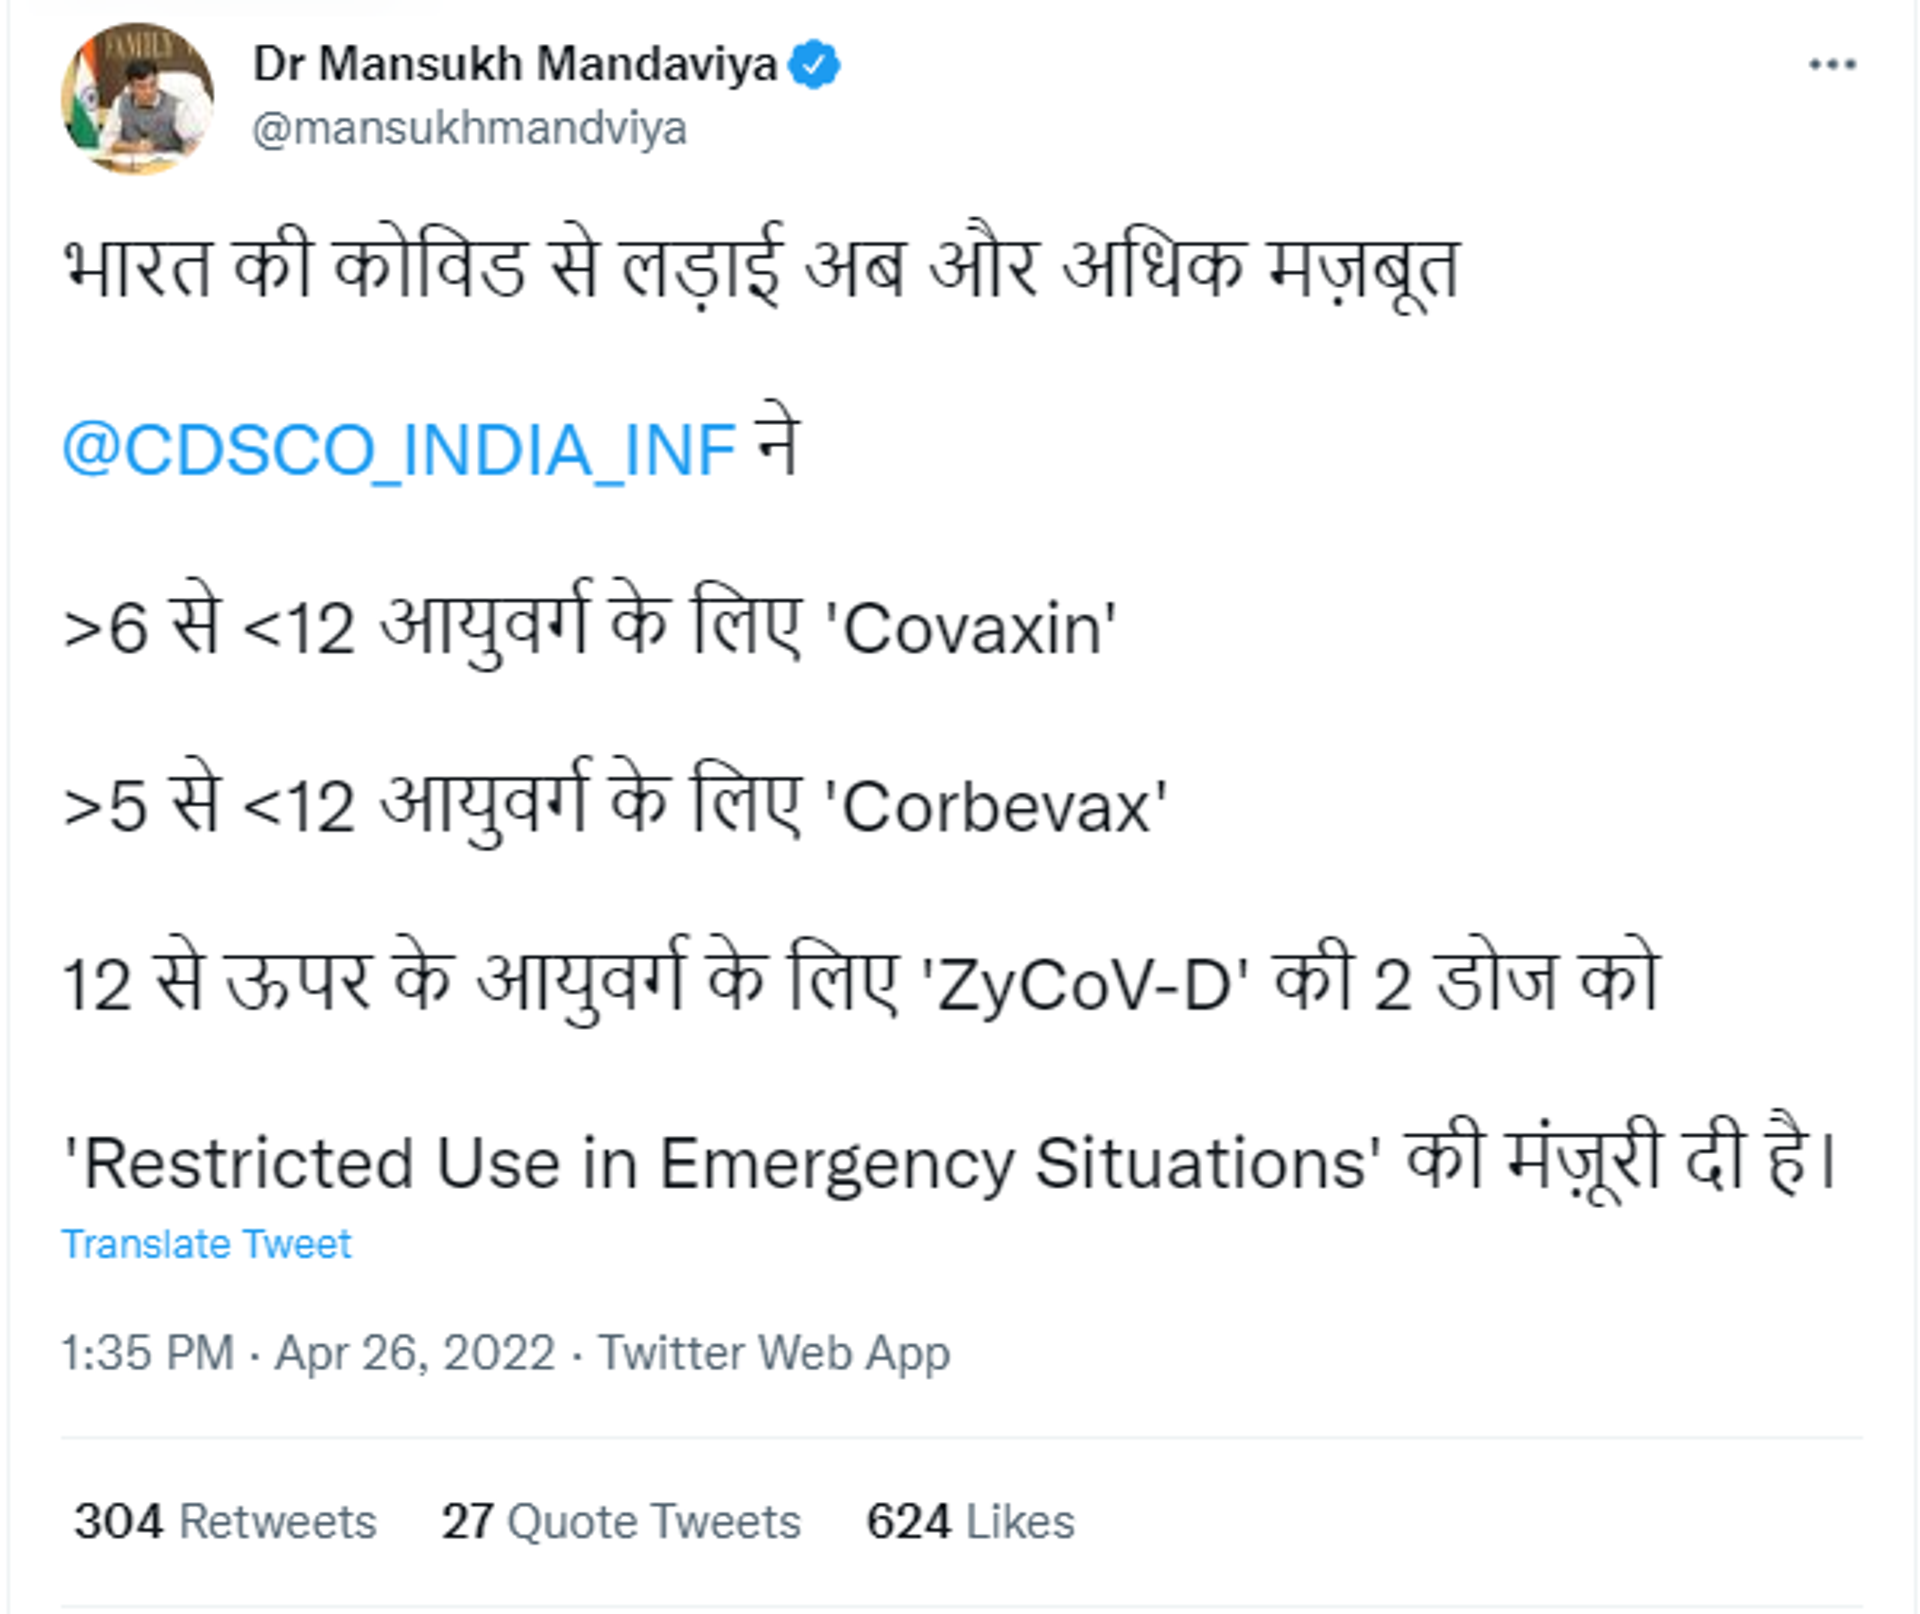 Federal Health Minister Mansukh Mandaviya Confirms Granting Emergency Use Authorisation to Covaxin for Children in Age Group of 6-12 Years - Sputnik International, 1920, 26.04.2022